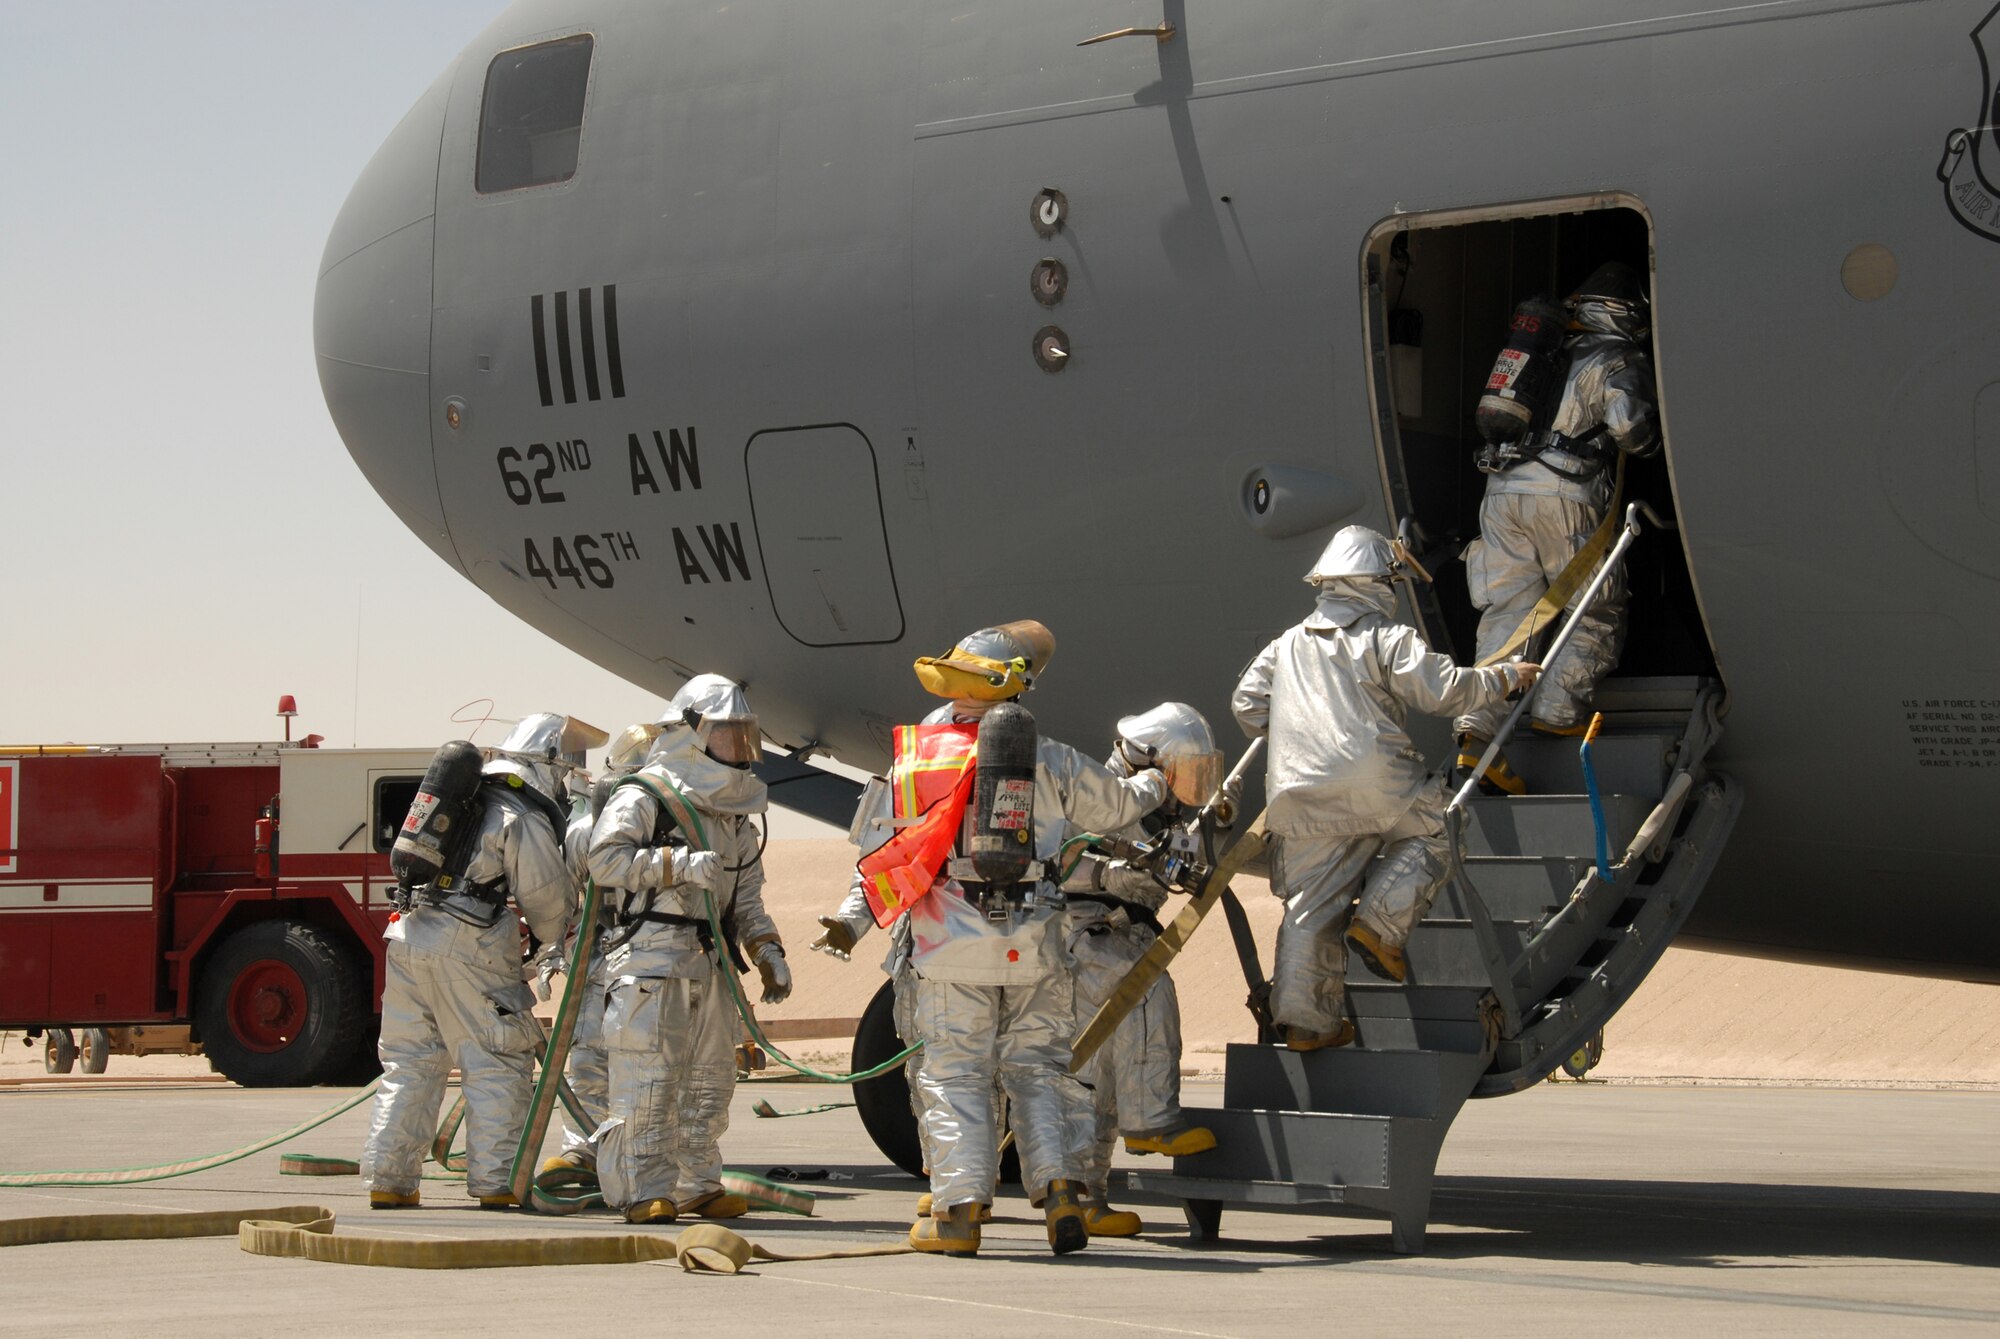 Firefighters from the 379th Expeditionary Civil Engineer Squadron Fire and Emergency Services Flight practice entering a C-17 Globemaster with the necessary tools and equipment to rescue crewmembers and extinguish an interior fire during an exercise Monday. The hands-on training ensures firefighters are ready to deal with any type of emergency. Firefighters must be proficient in properly shutting-down aircraft engines, activating and discharging the on-board fire suppression system, turning off the “master” power switch, and properly opening all emergency exits, doors and windows. (U.S. Air Force photo by Airman 1st Class Gustavo Gonzalez)